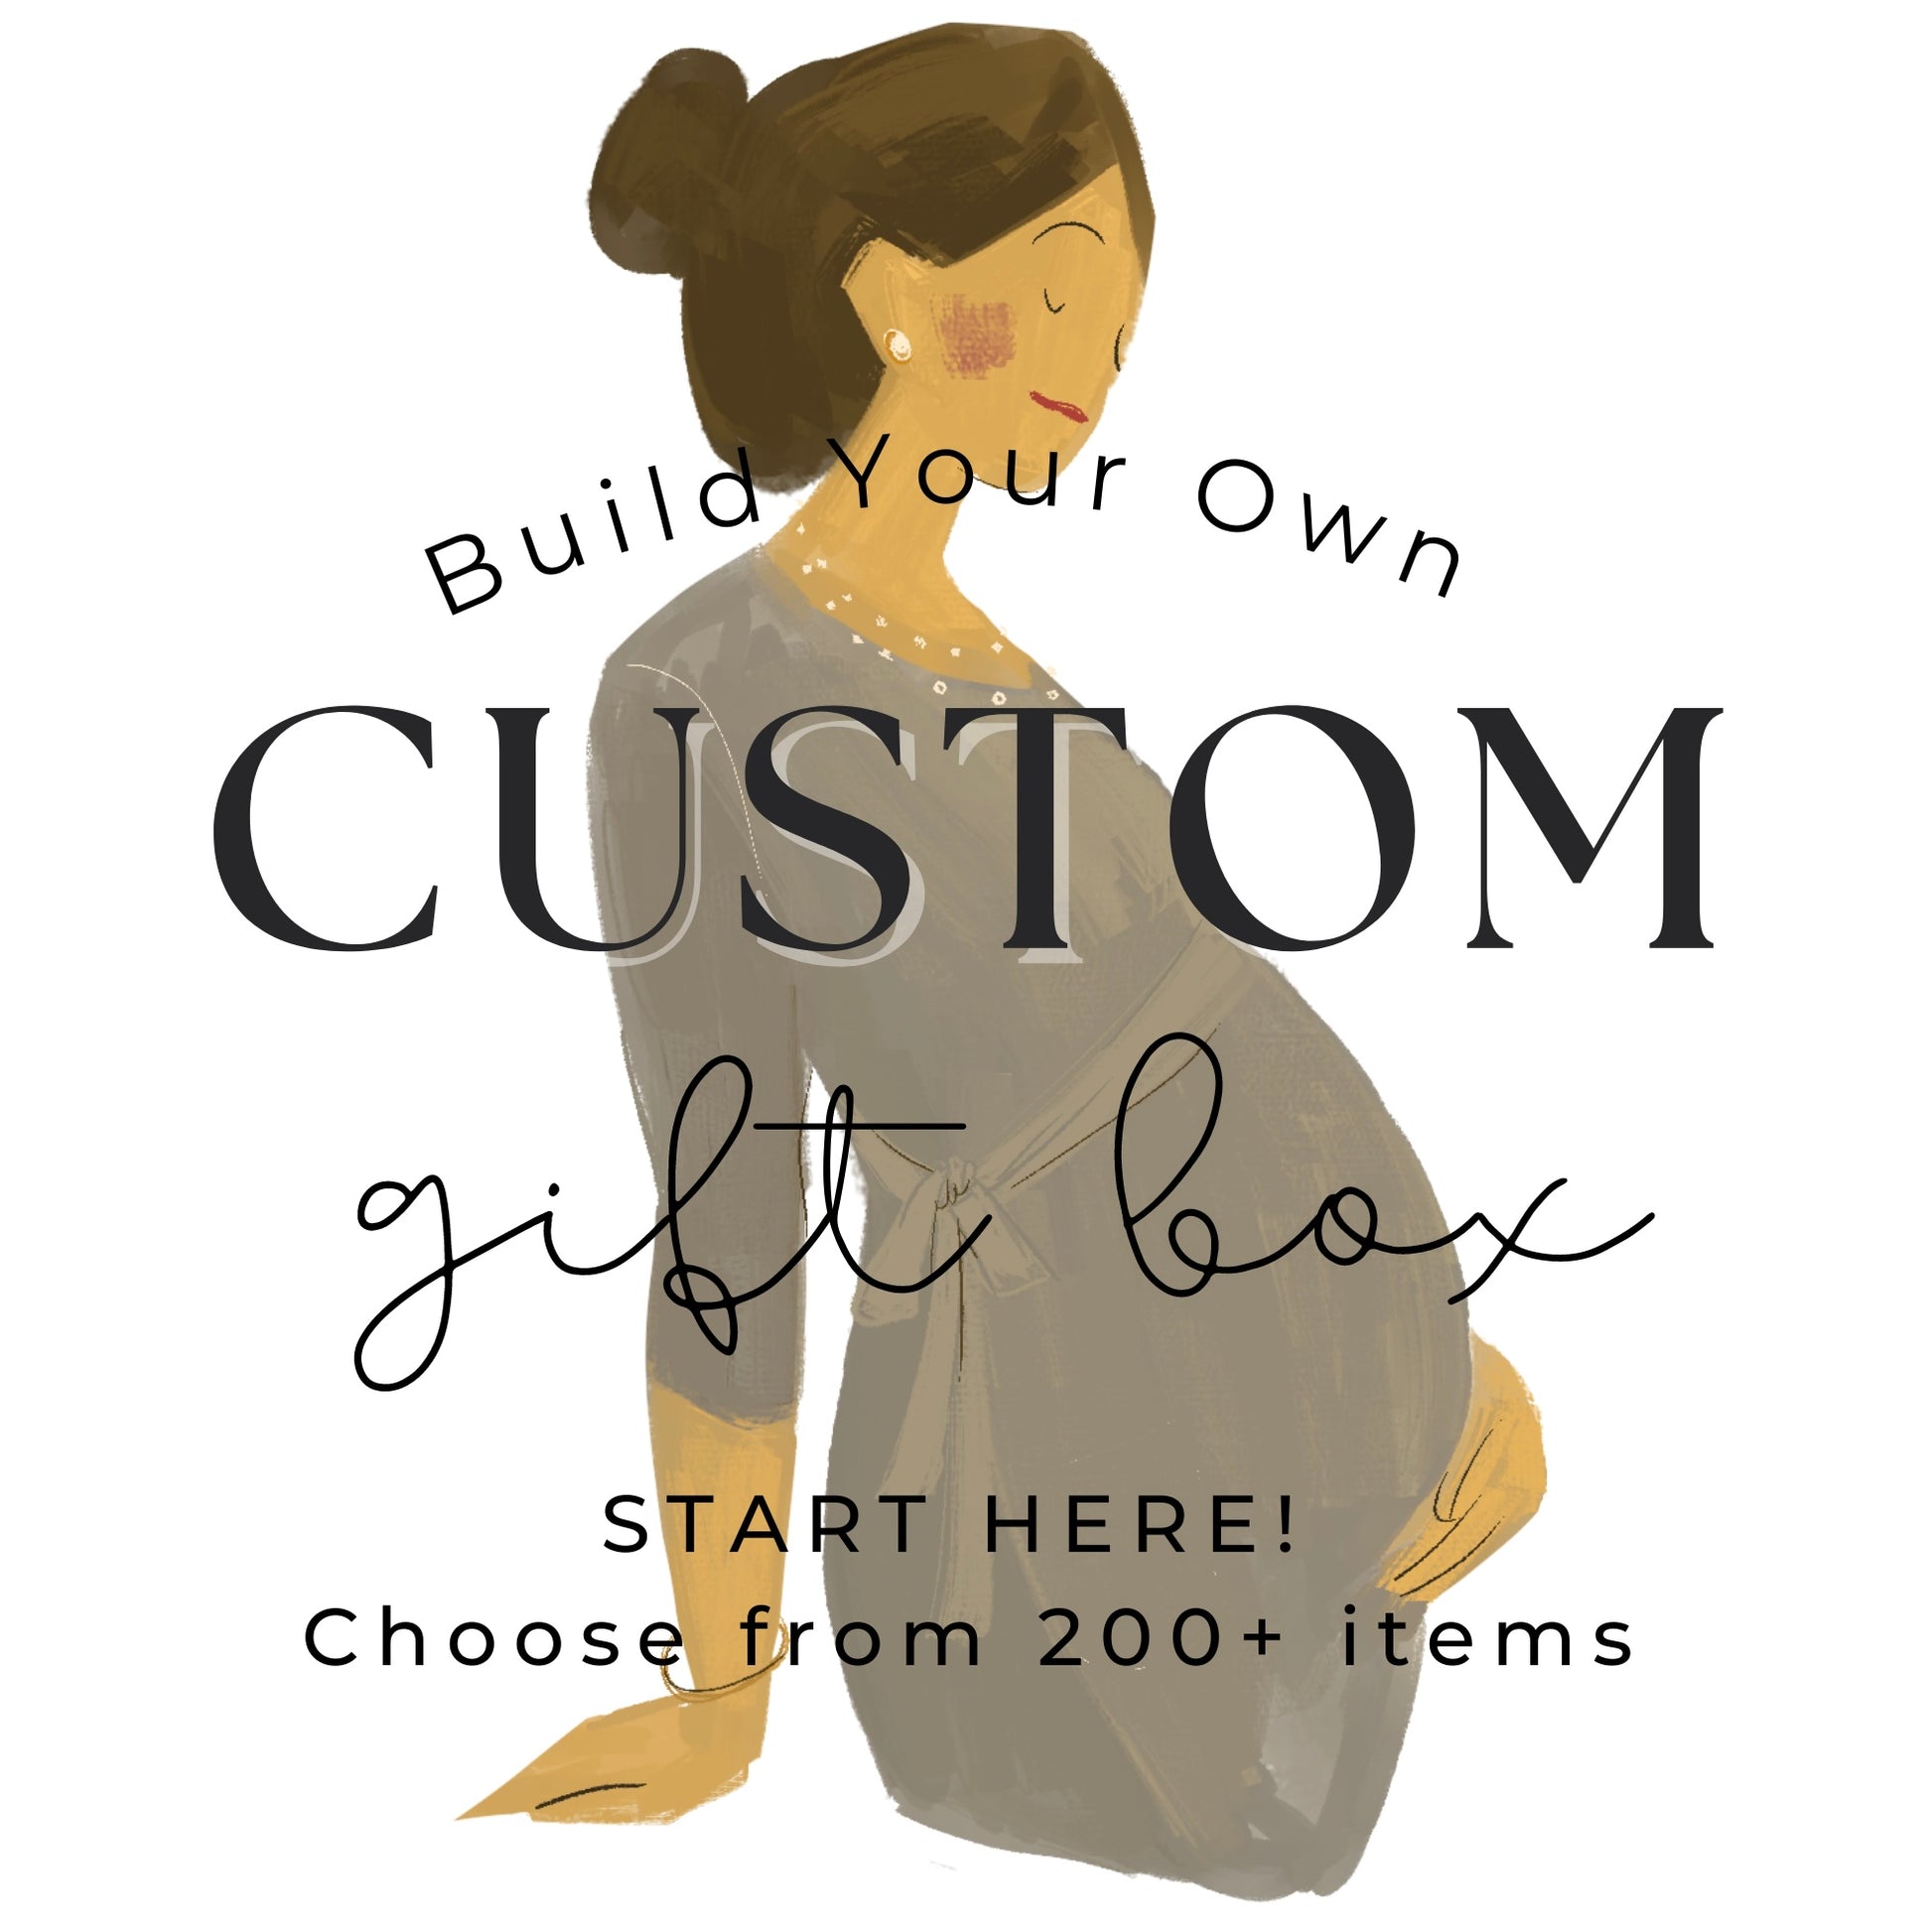 Future Mom Gift, Self Care Kit, Postpartum Care Package, Recovery